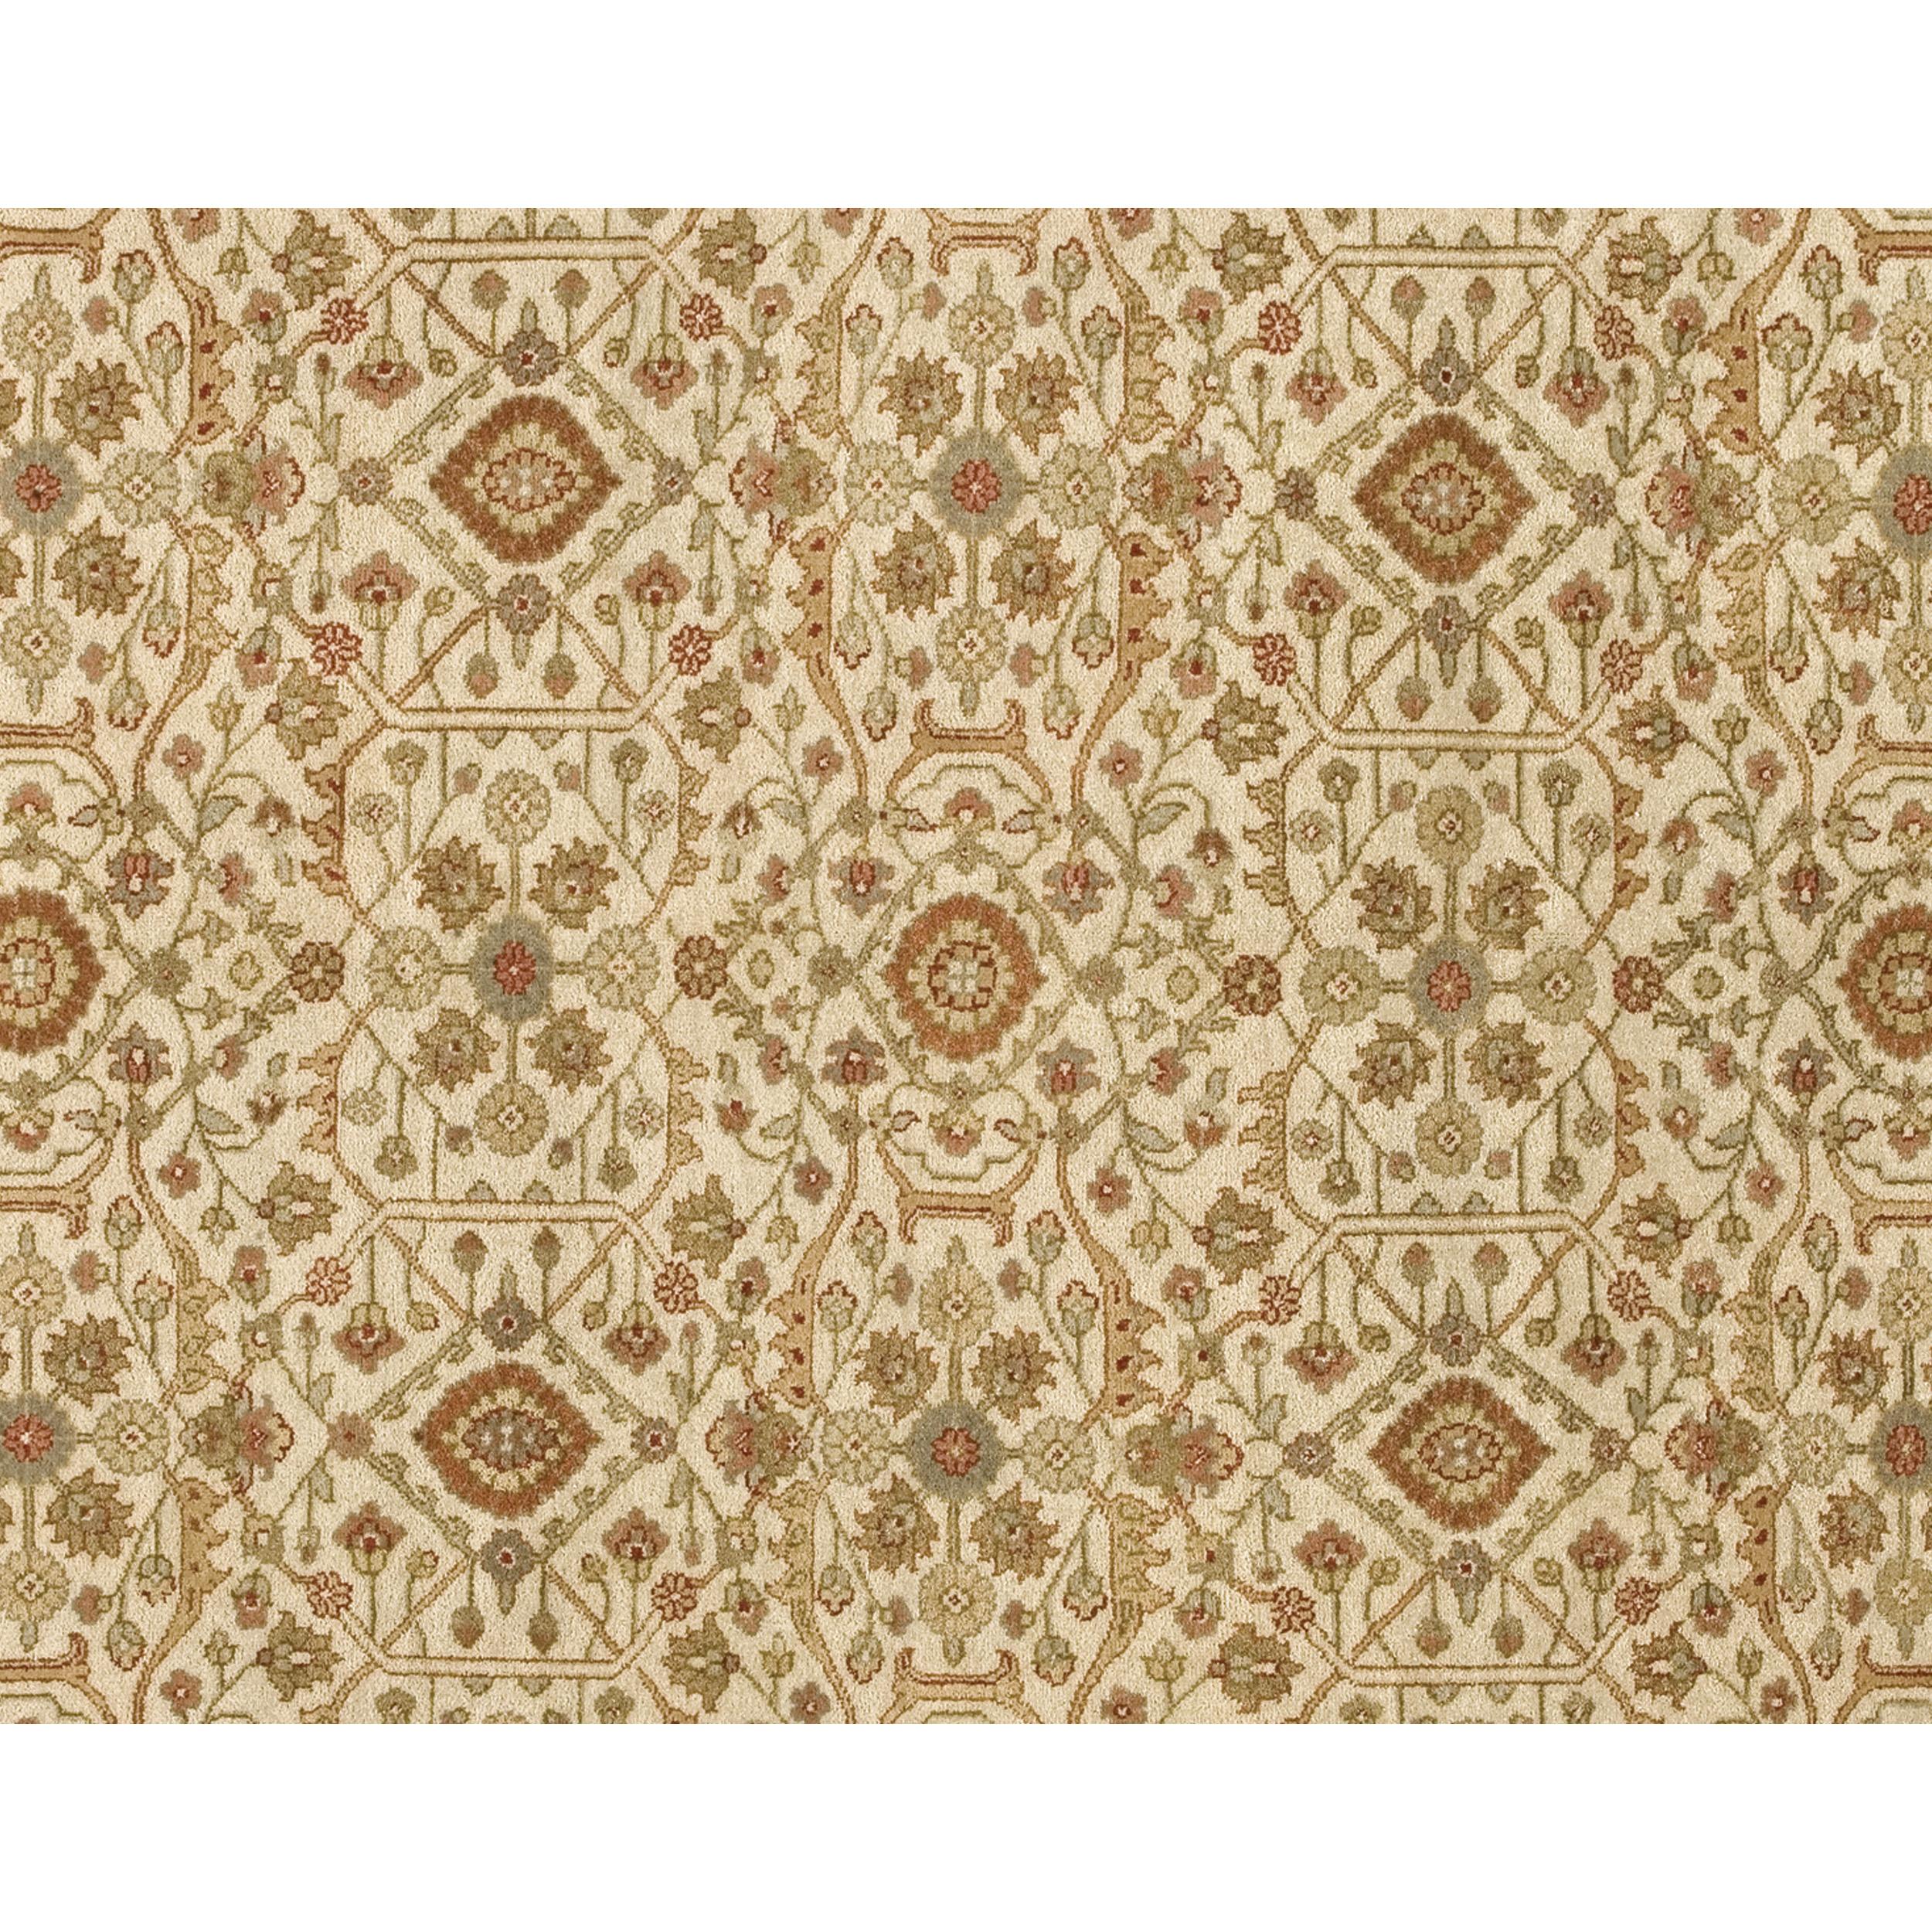 Indian Luxury Traditional Hand-Knotted Ziegler Ivory & Brick 12x22 Rug For Sale